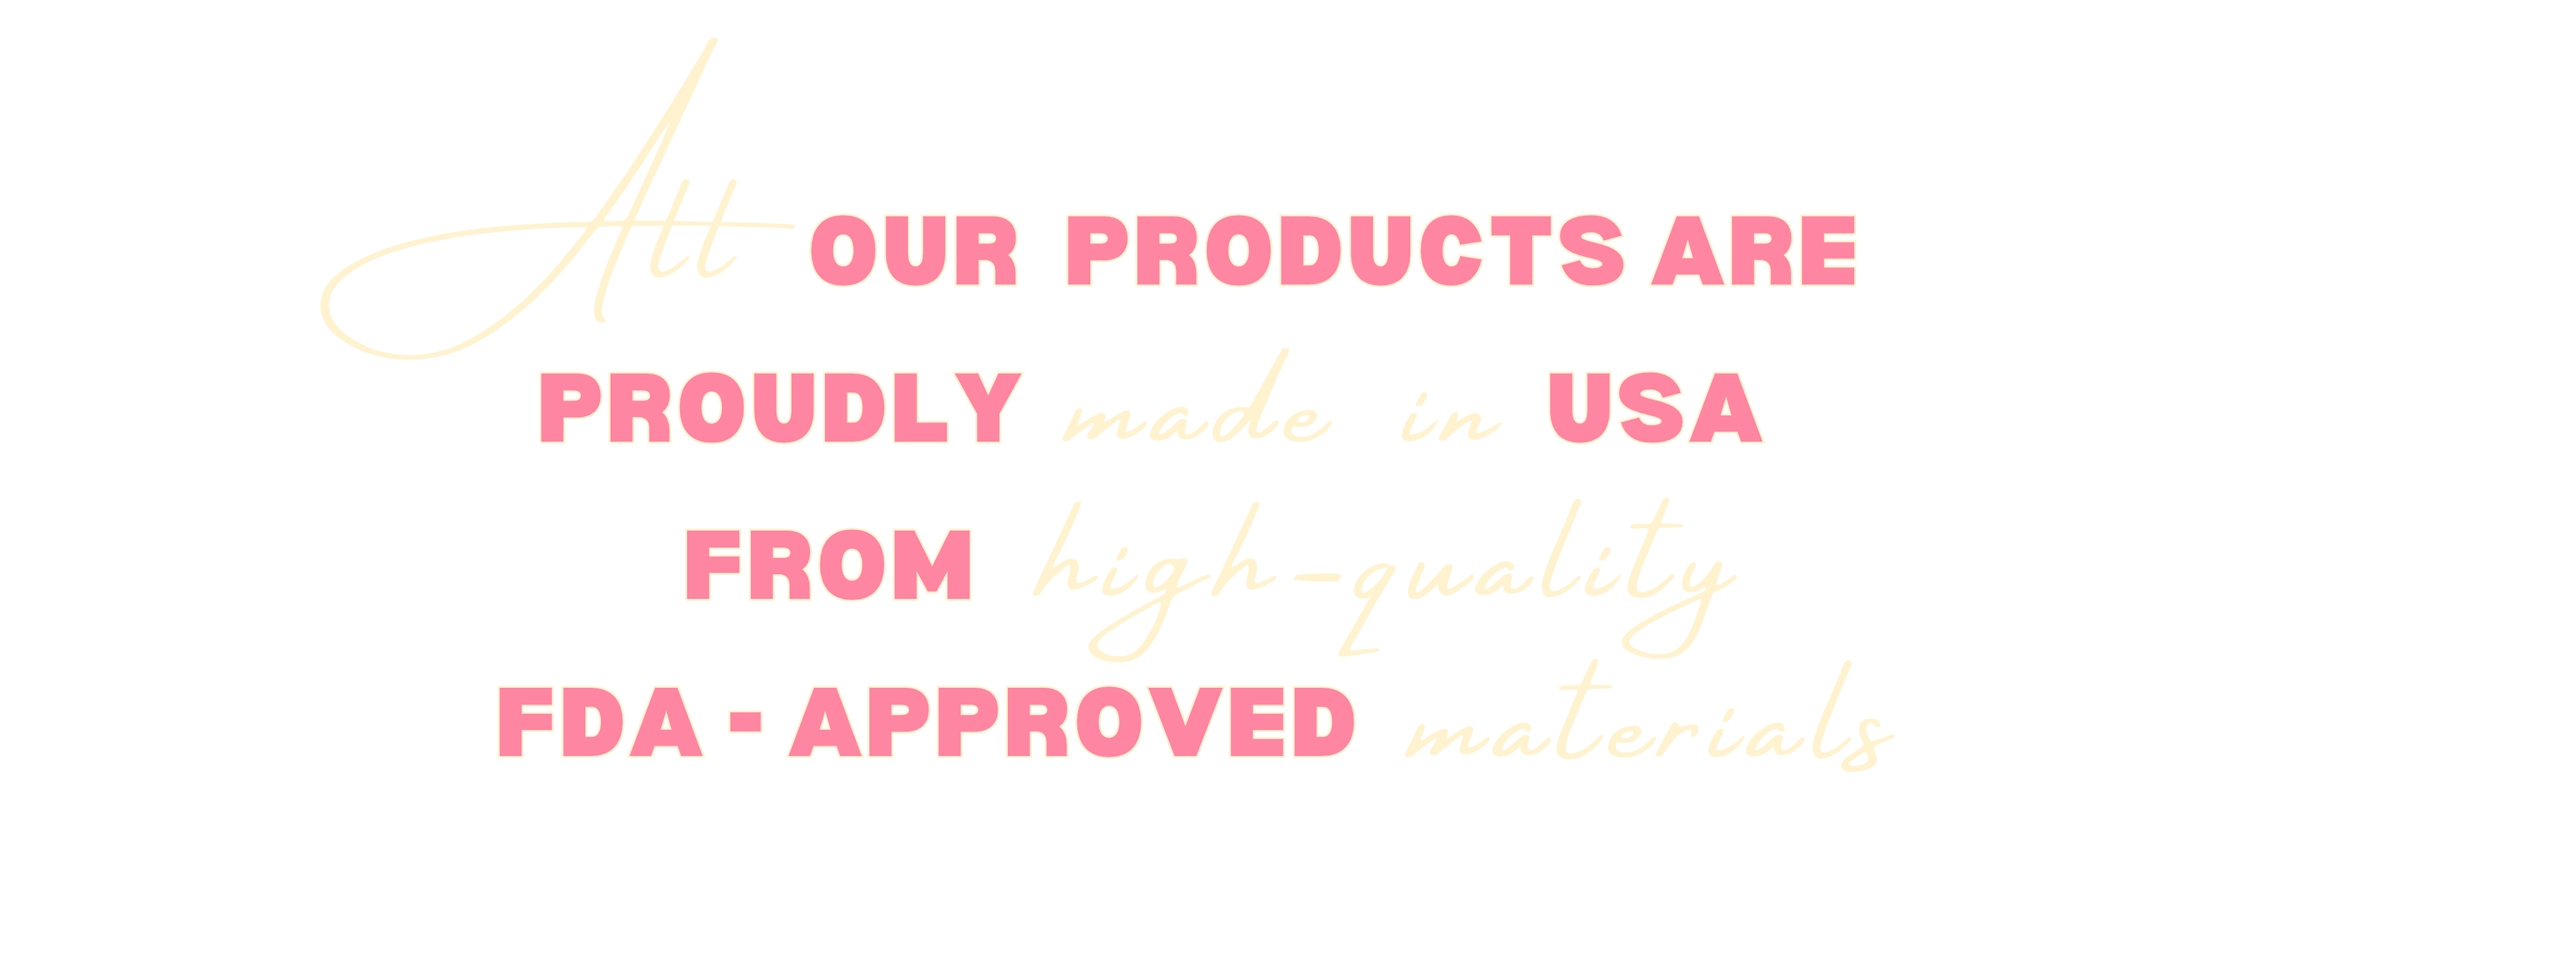 All our products are proudly made in USA from high-quality fda-approved materials